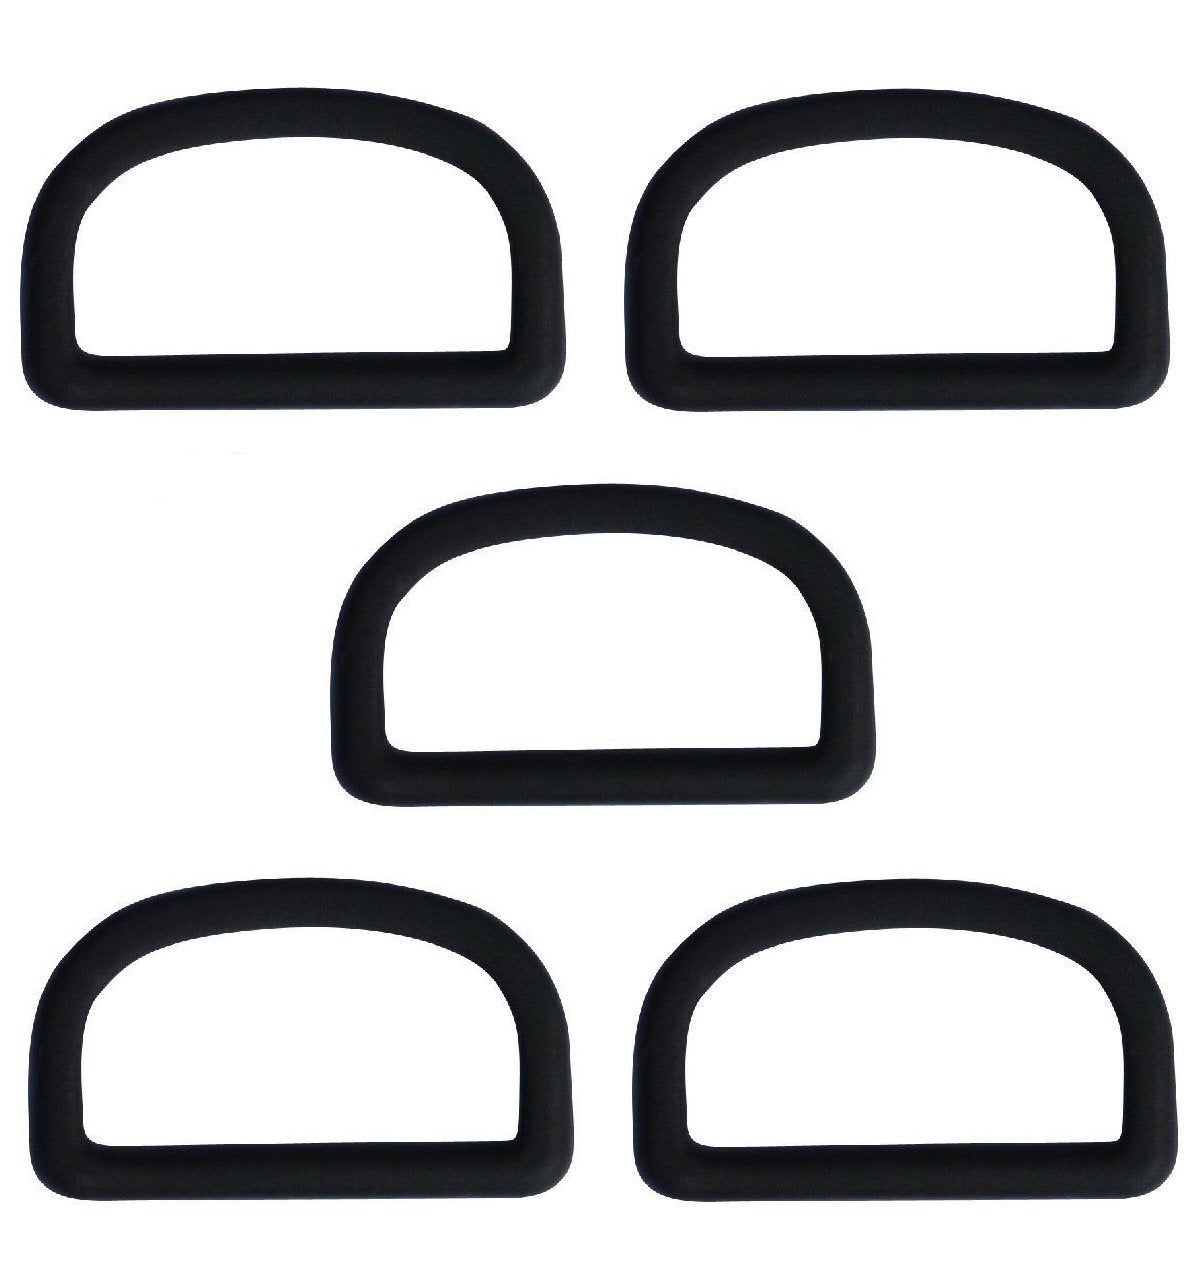 Benristraps 38mm Plastic D Ring (pack of 5)